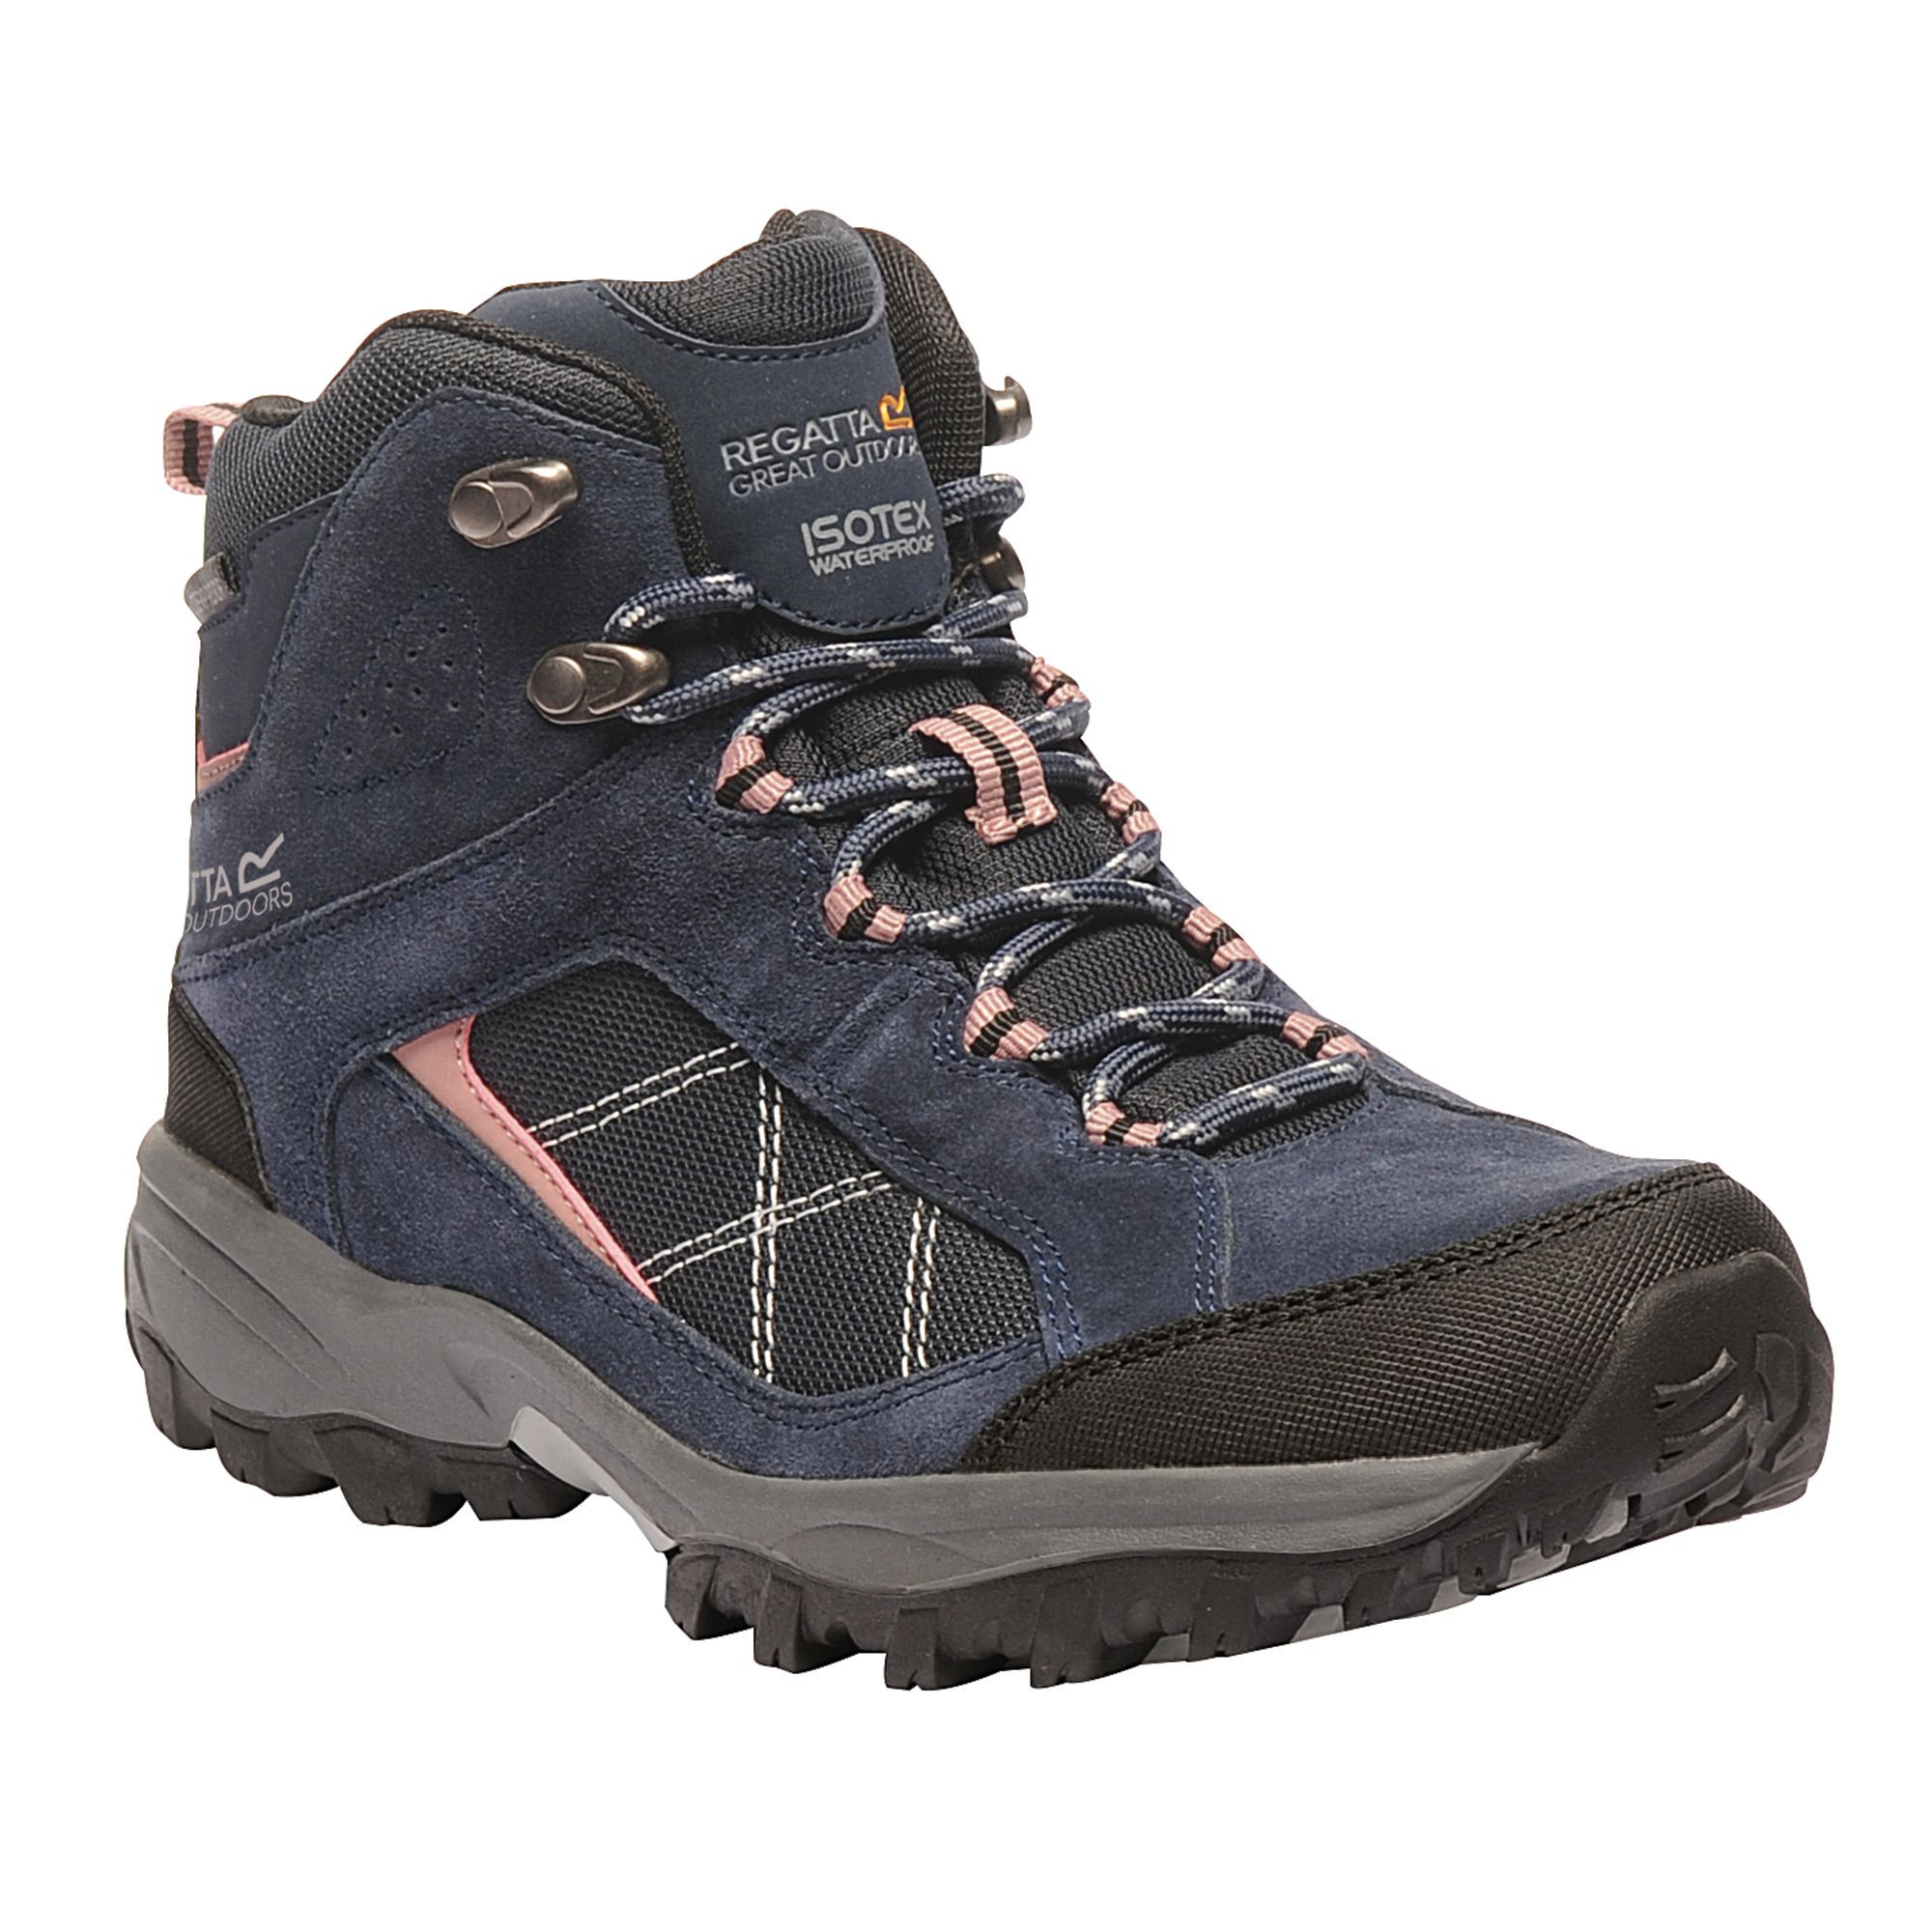 For fells to fields, trail to path, whatever the weather, the Lady Clydebank Hiking Boot offers reliable comfort and performance. The durable suede/mesh uppers use water shedding Hydropel technology with a waterproof /breathable Isotex membrane to keep feet dry inside and out. Tough wearing rubber overlays around the toe and heel and stabilising ankle padding protect on uneven ground. DuoPoint sole technology engineered with targeted cushioning minimises shock and fatigue on longer hikes.